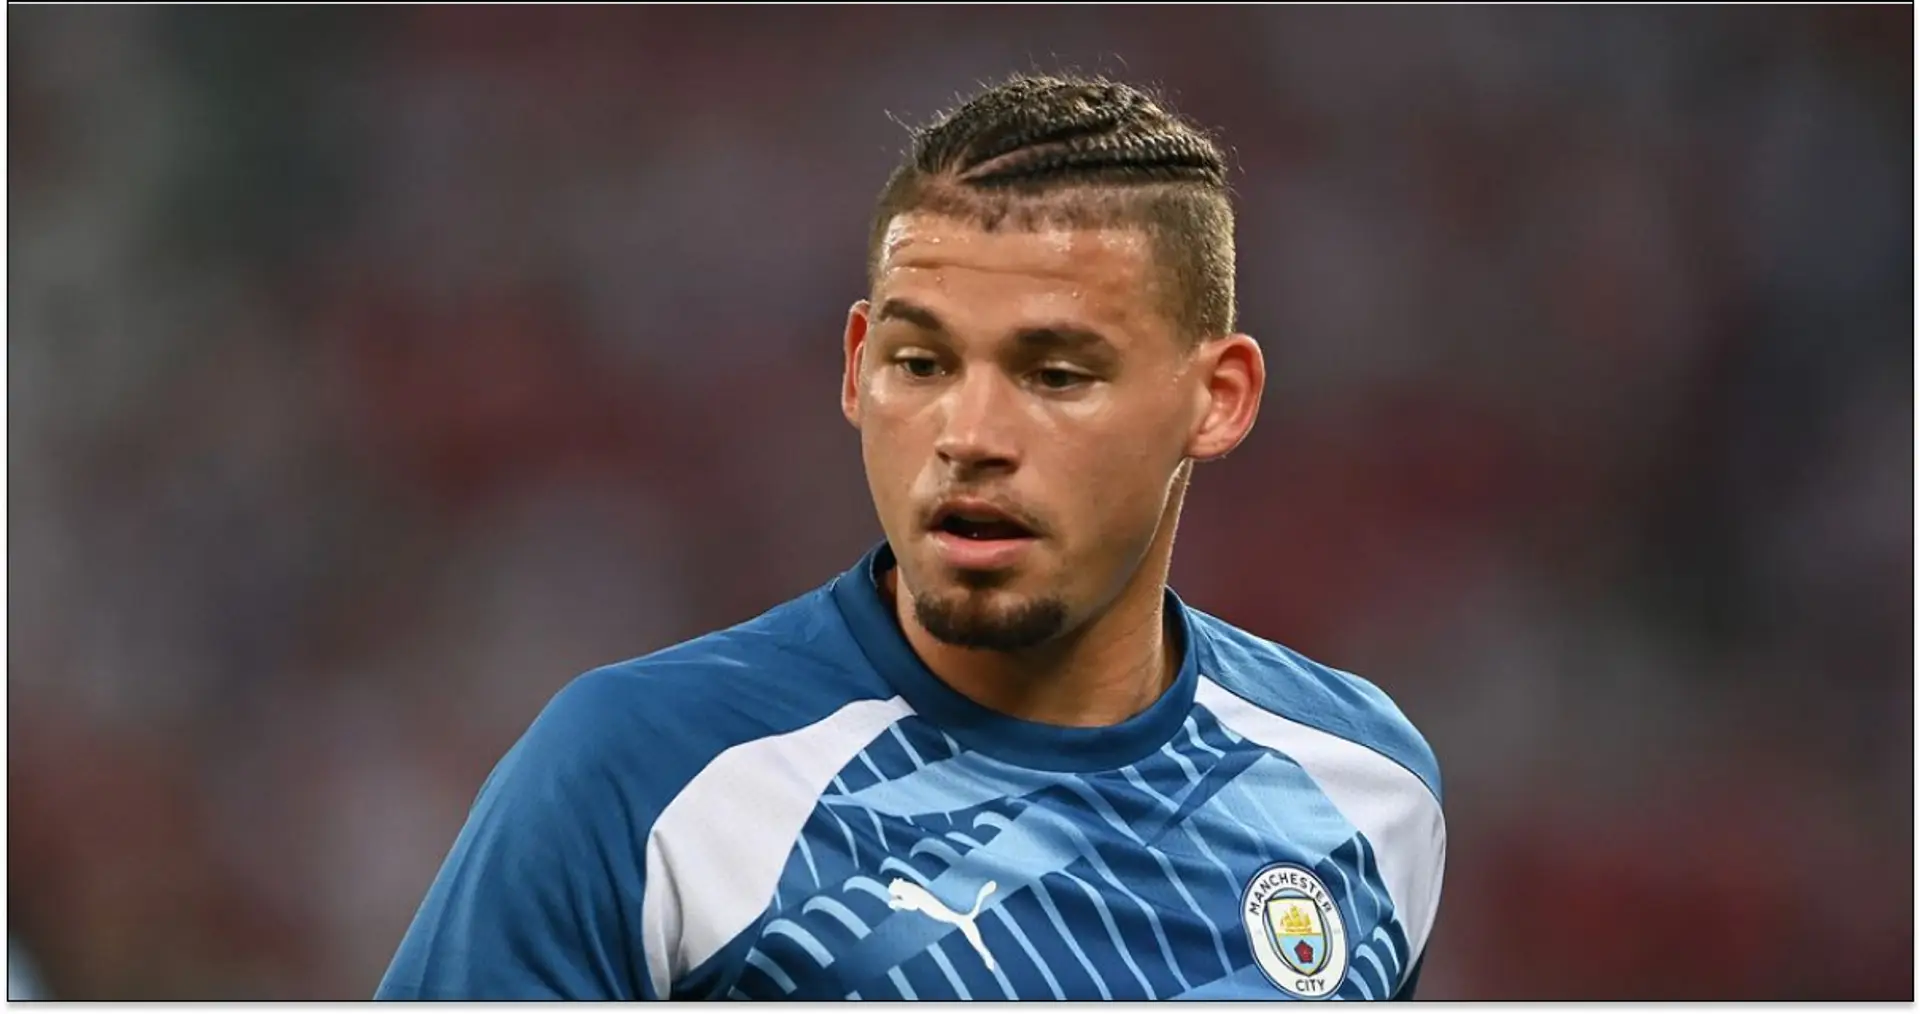 'He's exactly what they need': City urged not to sell Kalvin Phillips to Liverpool